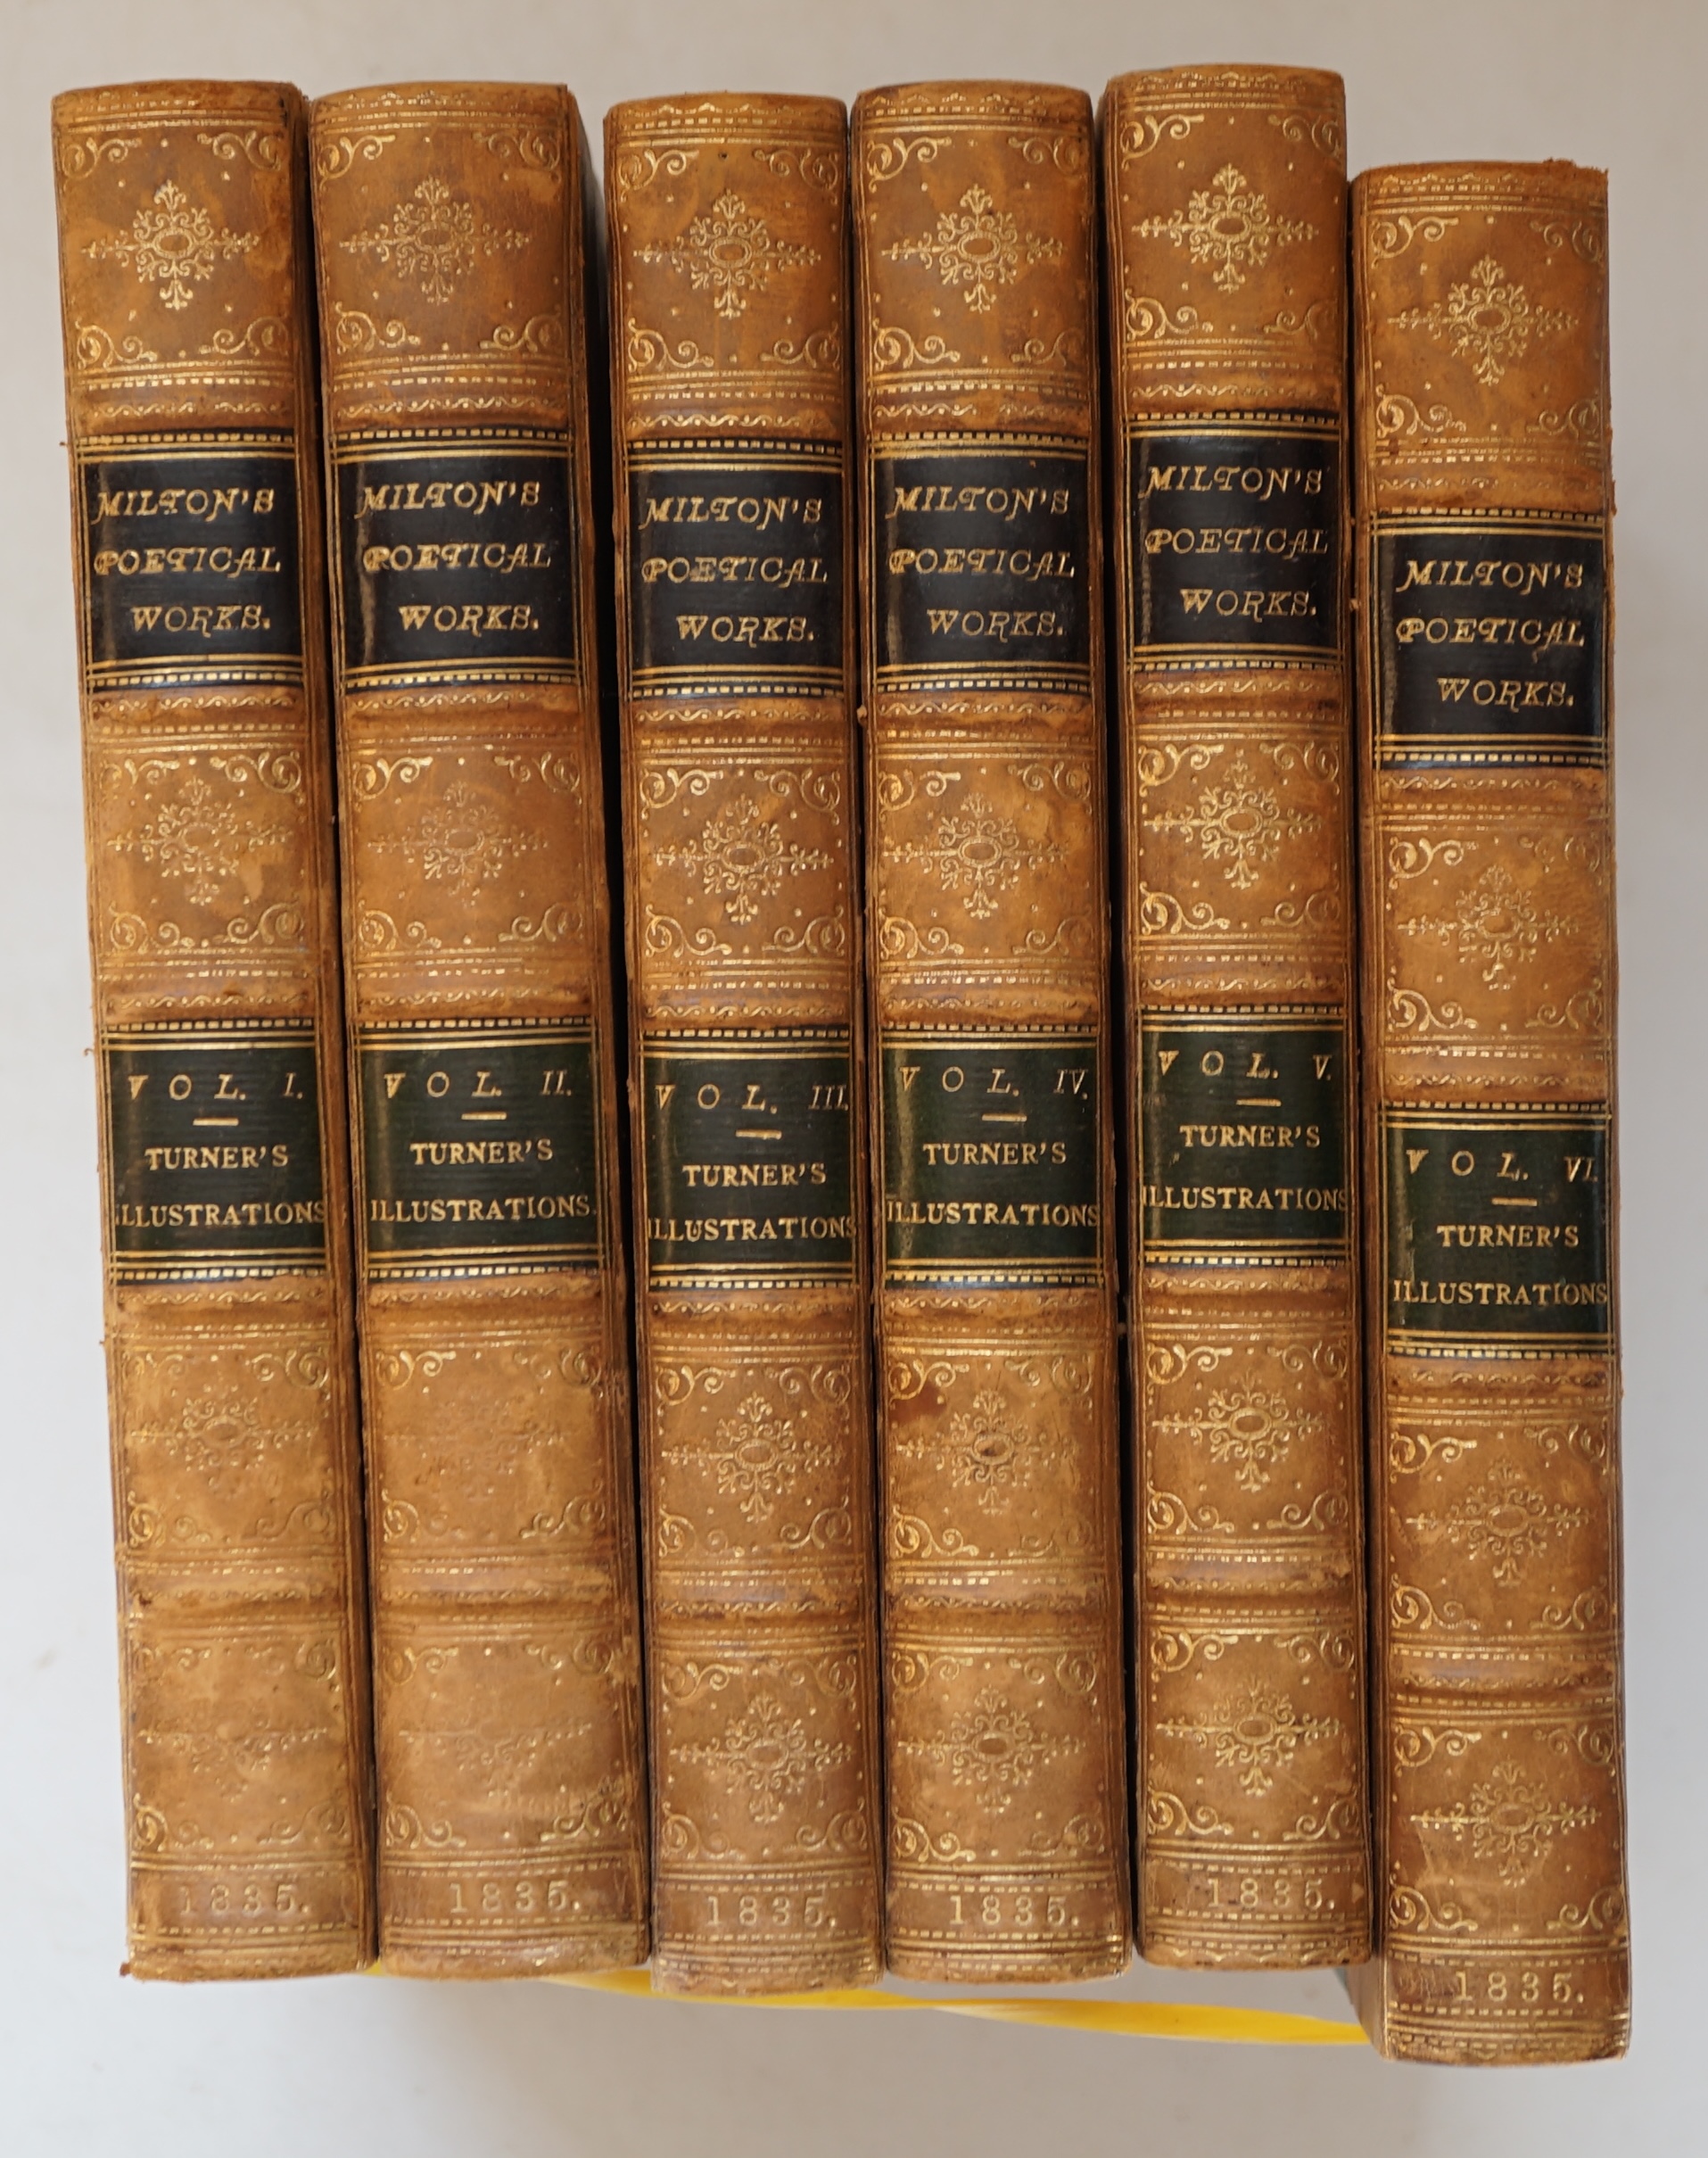 Milton, John - The Poetical Works, 6 vols, edited by Sir Egerton Brydges, 8vo, original half calf gilt, with marbled boards, engraved frontispiece and title to each volume, John Macrone, London, 1835